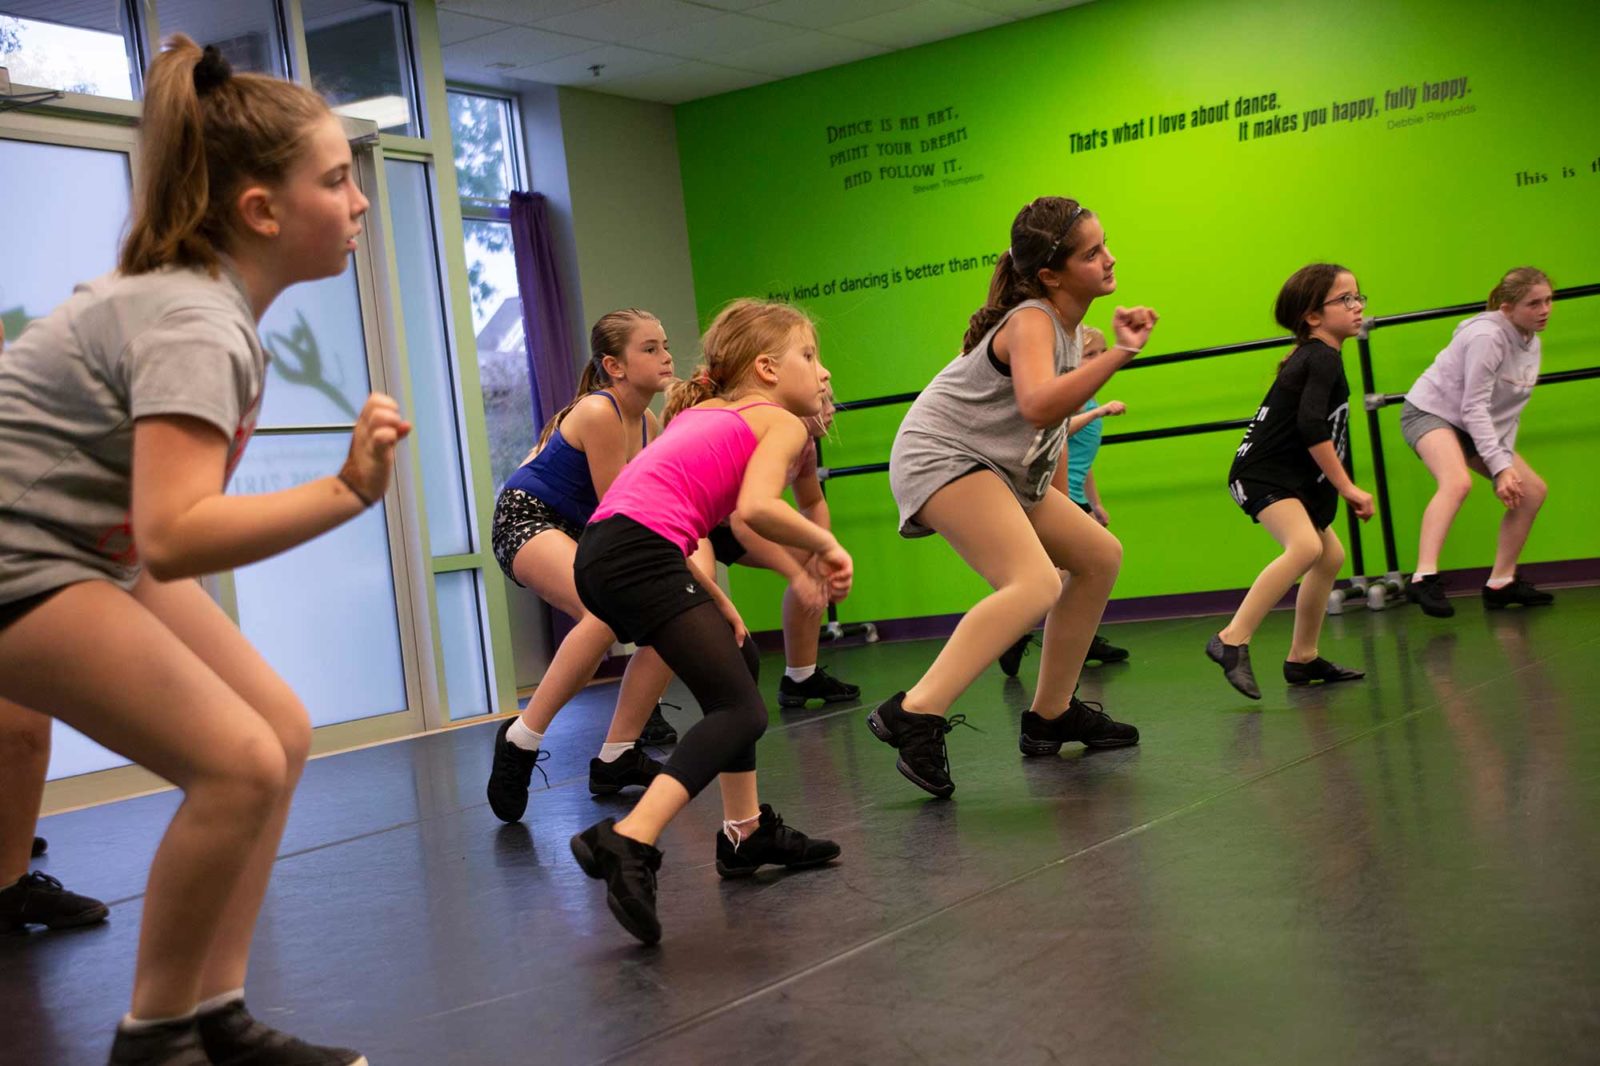 Group of girls learning a dance routine